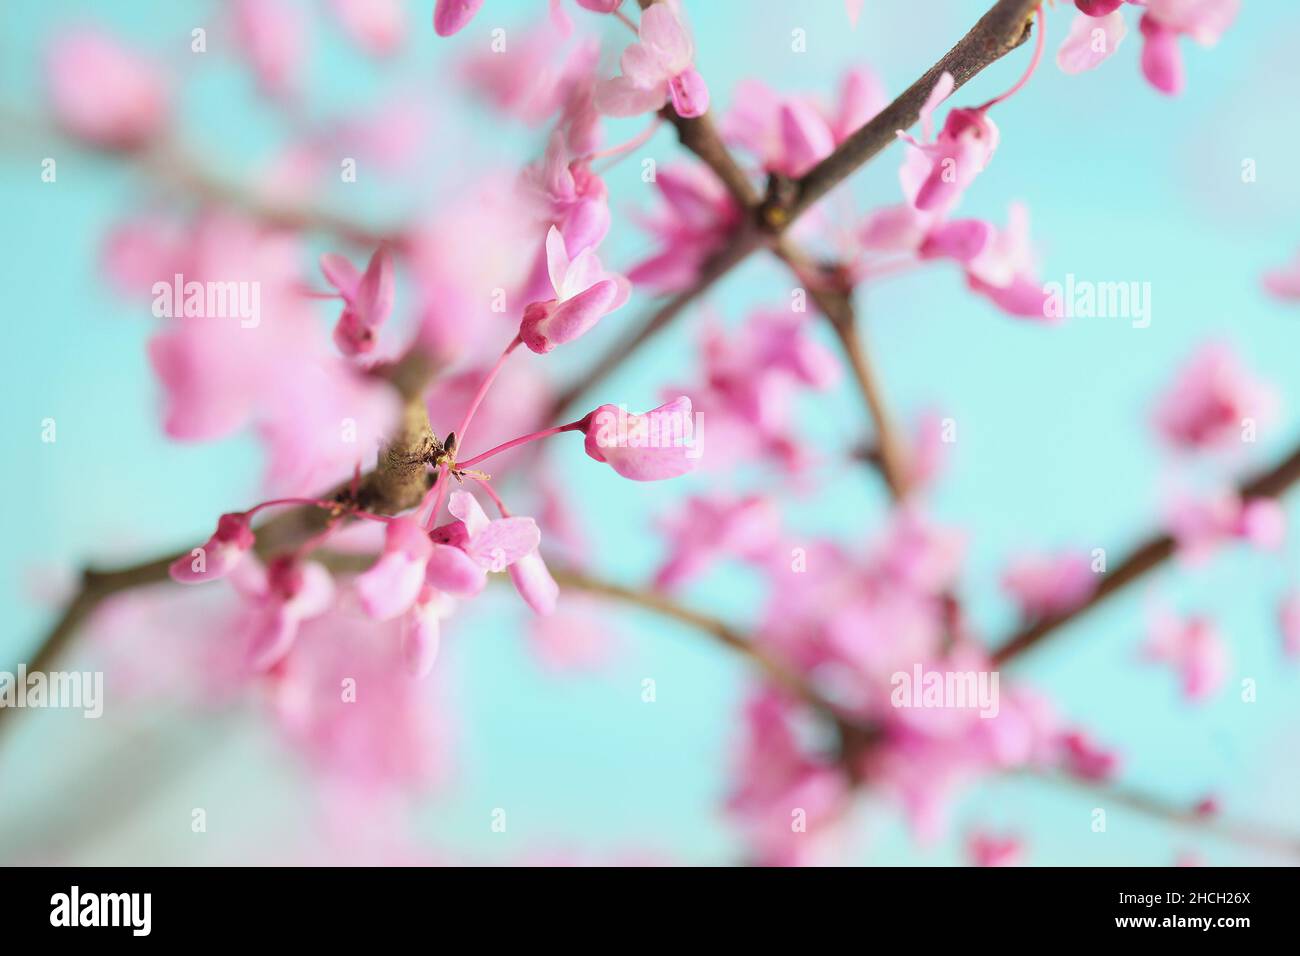 Abstract of  Eastern Redbud Tree, Cercis Canadensis, native to eastern North America shown here in full bloom. Blurred background. Stock Photo